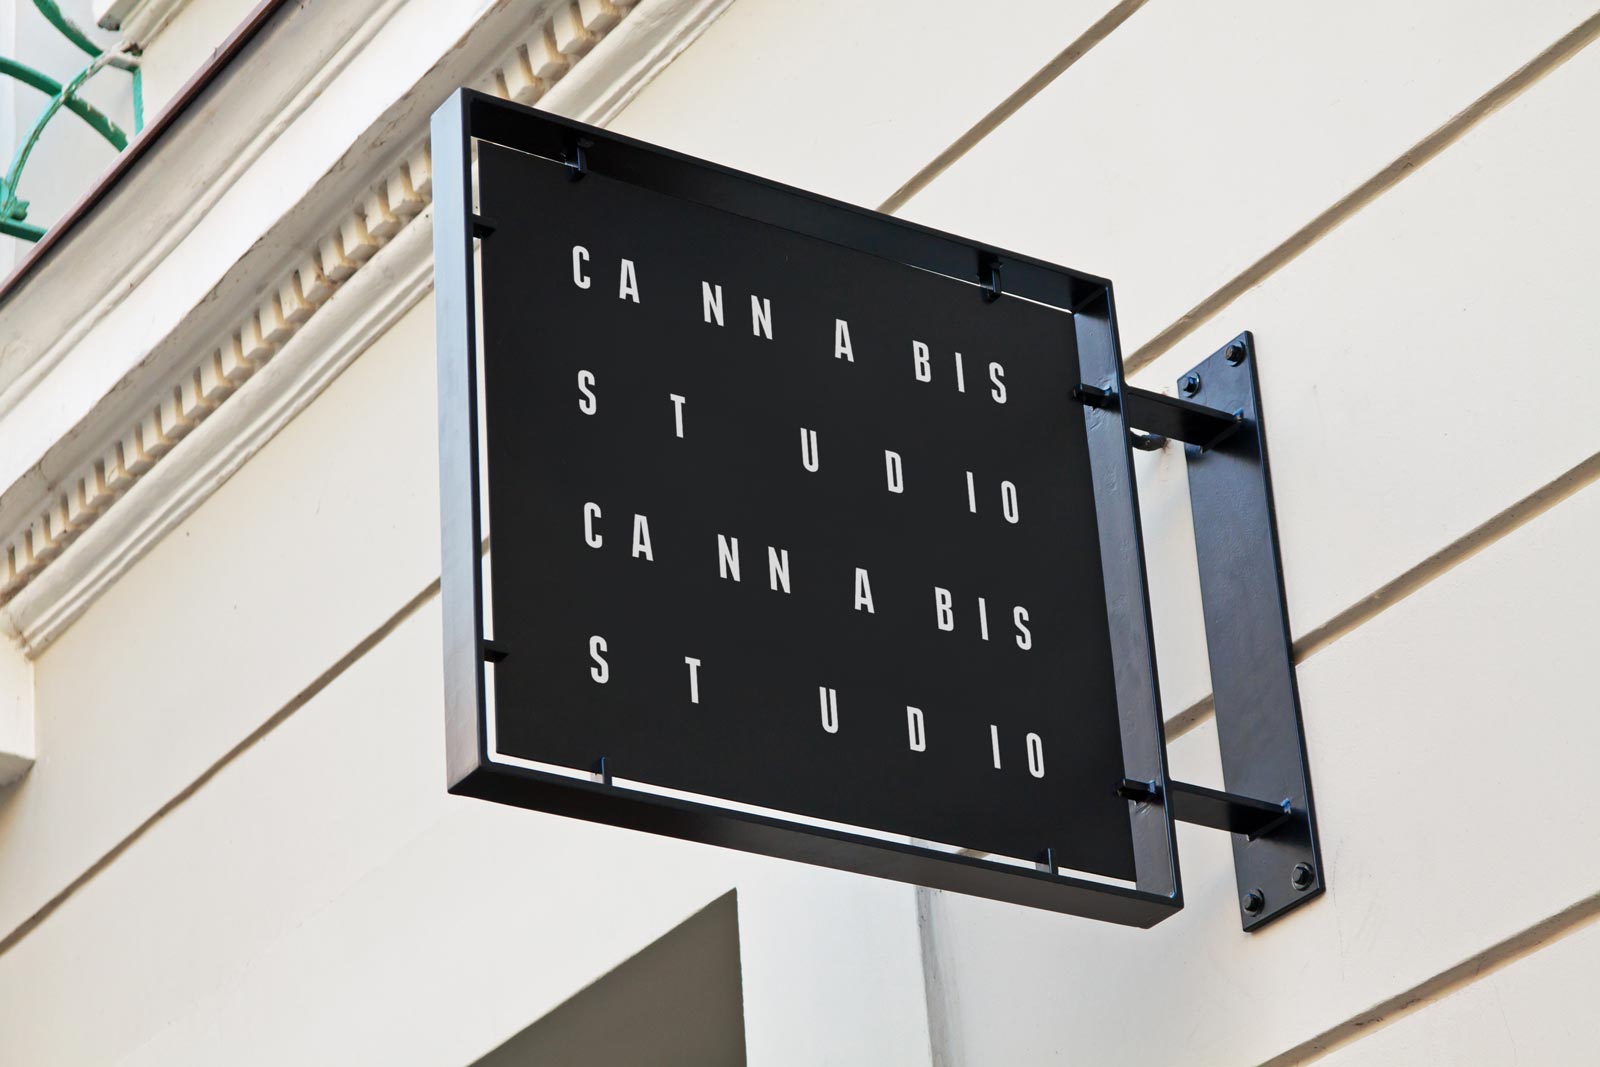 Photo of Cannabis Retail Signage design at store entrance